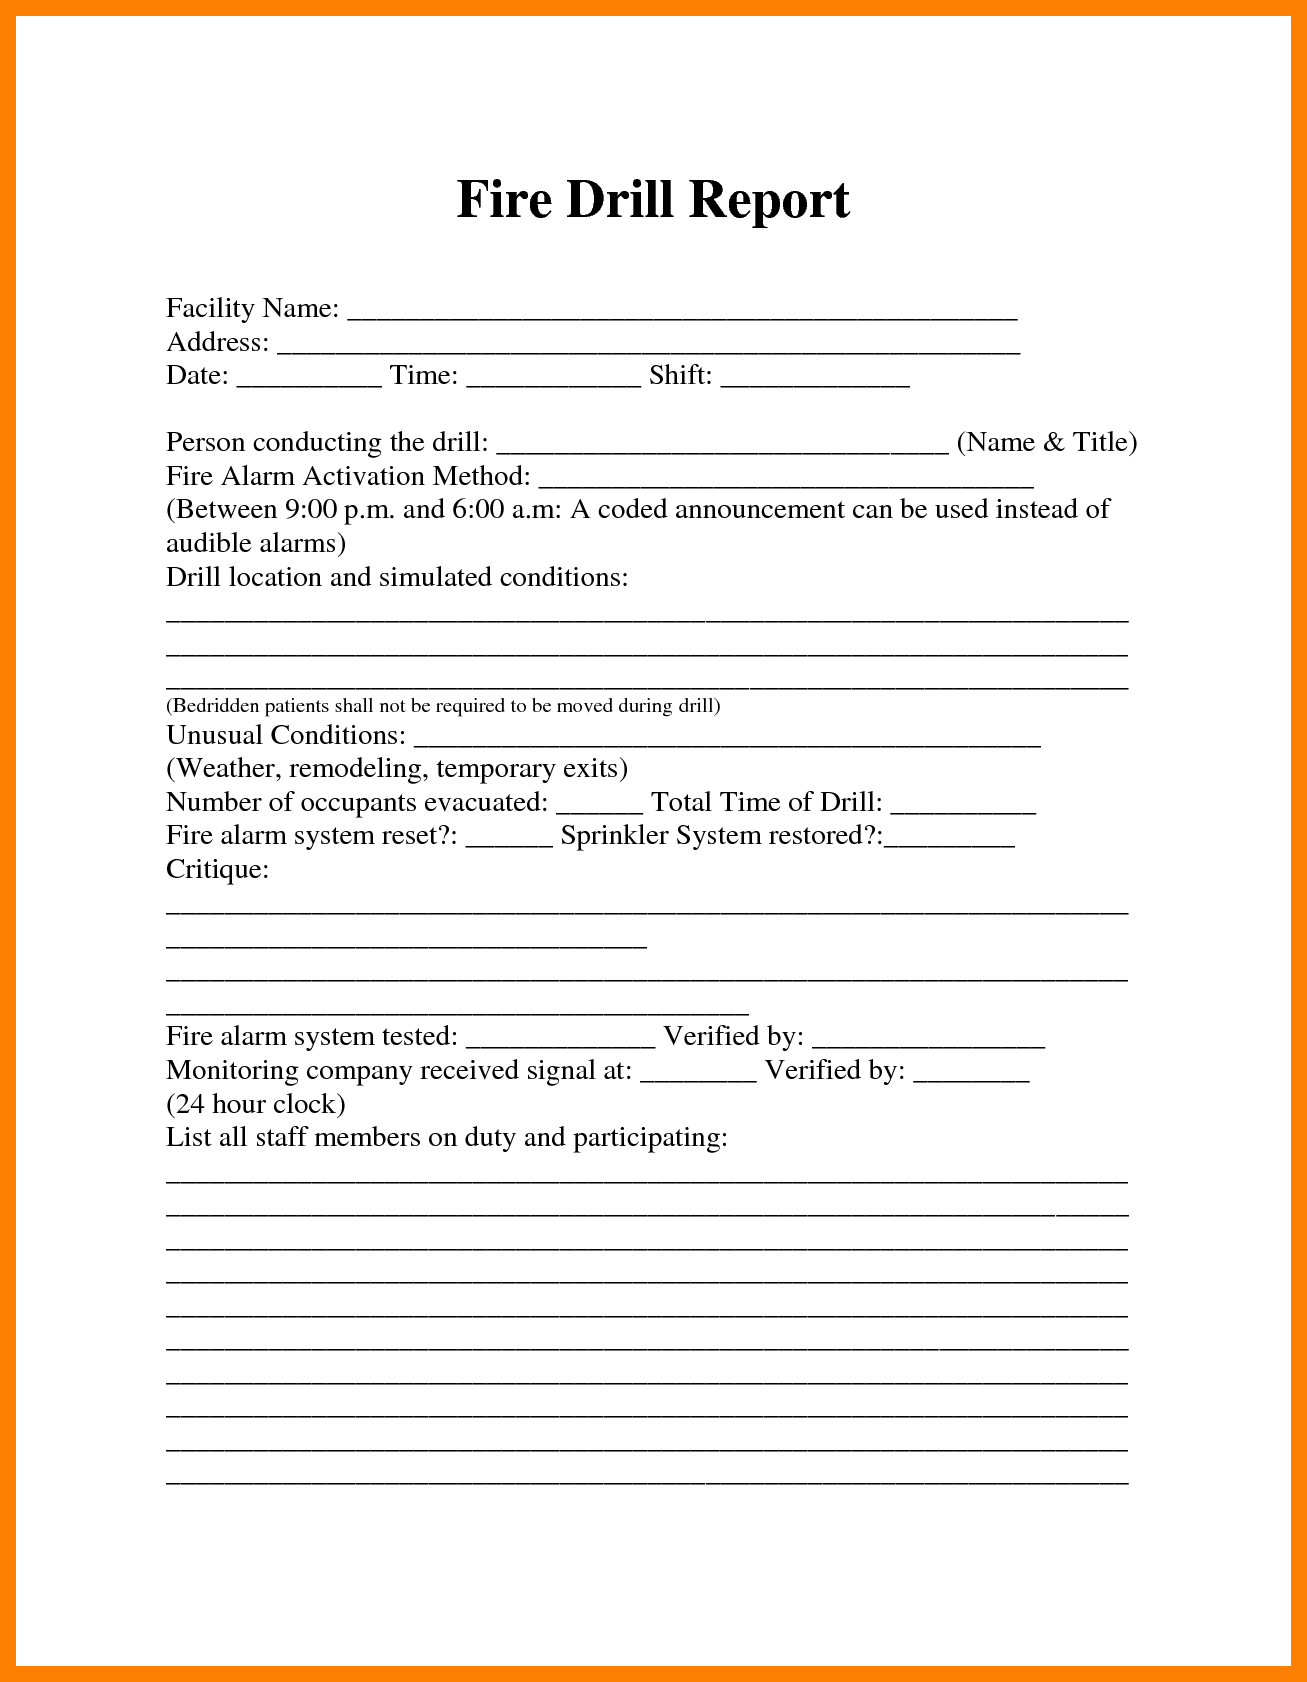 Image Result For Fire Drill Procedures For Summer Camp In Emergency Drill Report Template